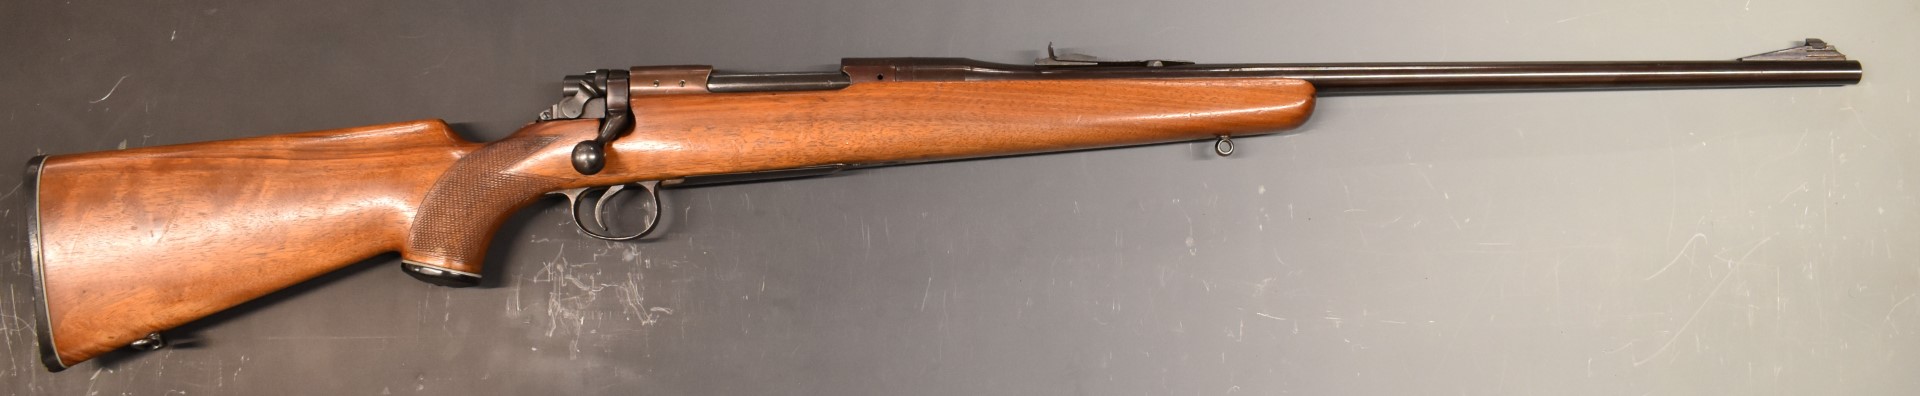 BSA .303 bolt-action rifle with chequered semi-pistol grip, adjustable sights, sling mounts and 24 - Image 2 of 3